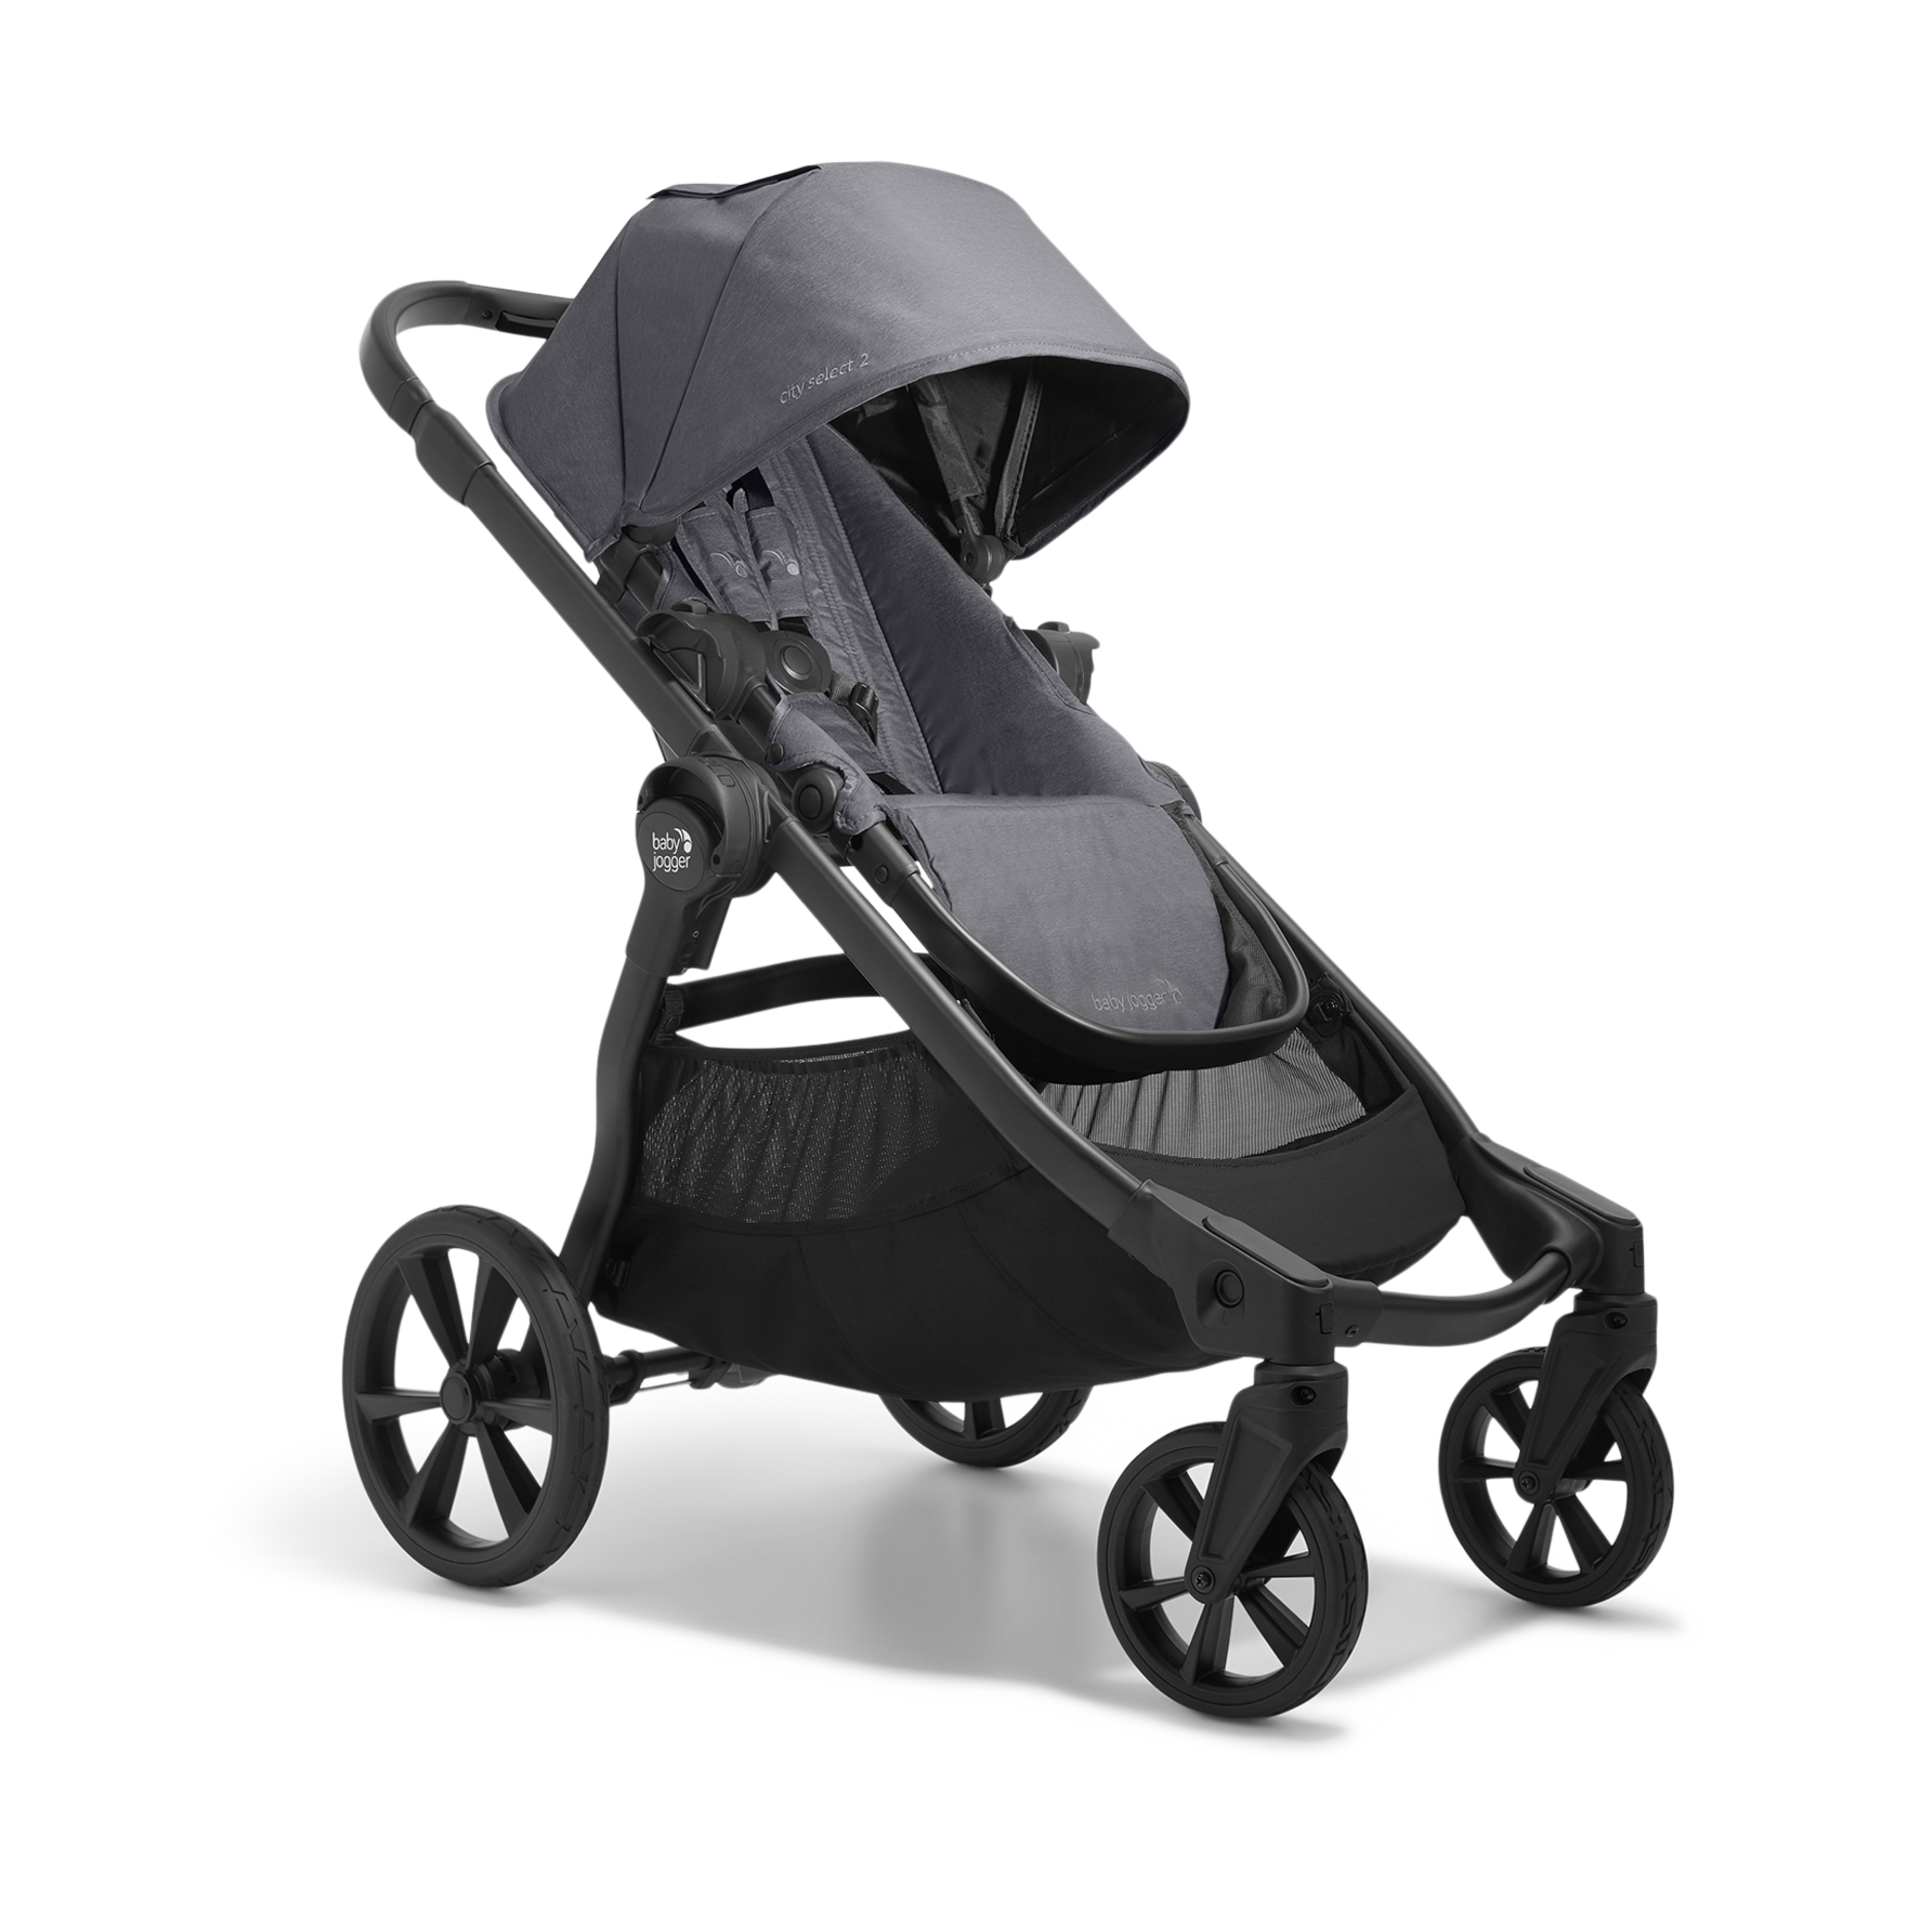 Baby Jogger City Select LUX Pram Bassinet Kit in Slate Free Shipping! New 